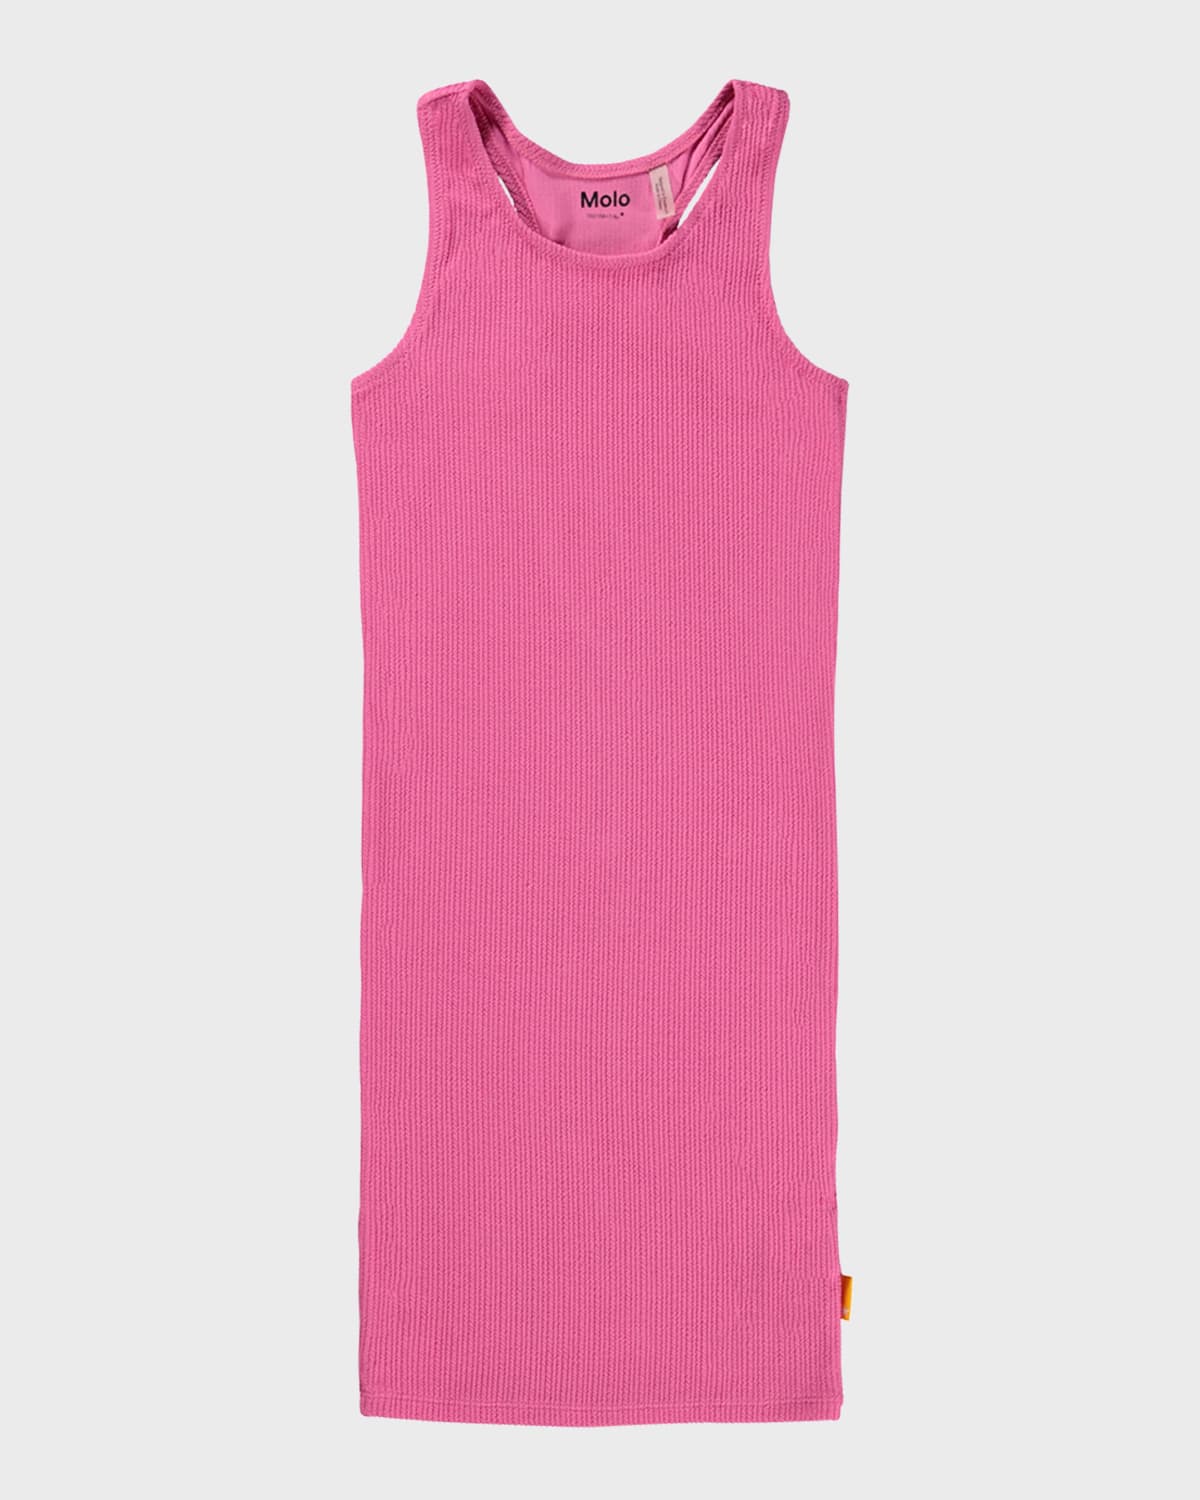 Molo Kids' Girl's Cailey Knit Tank Dress In Hibiscus